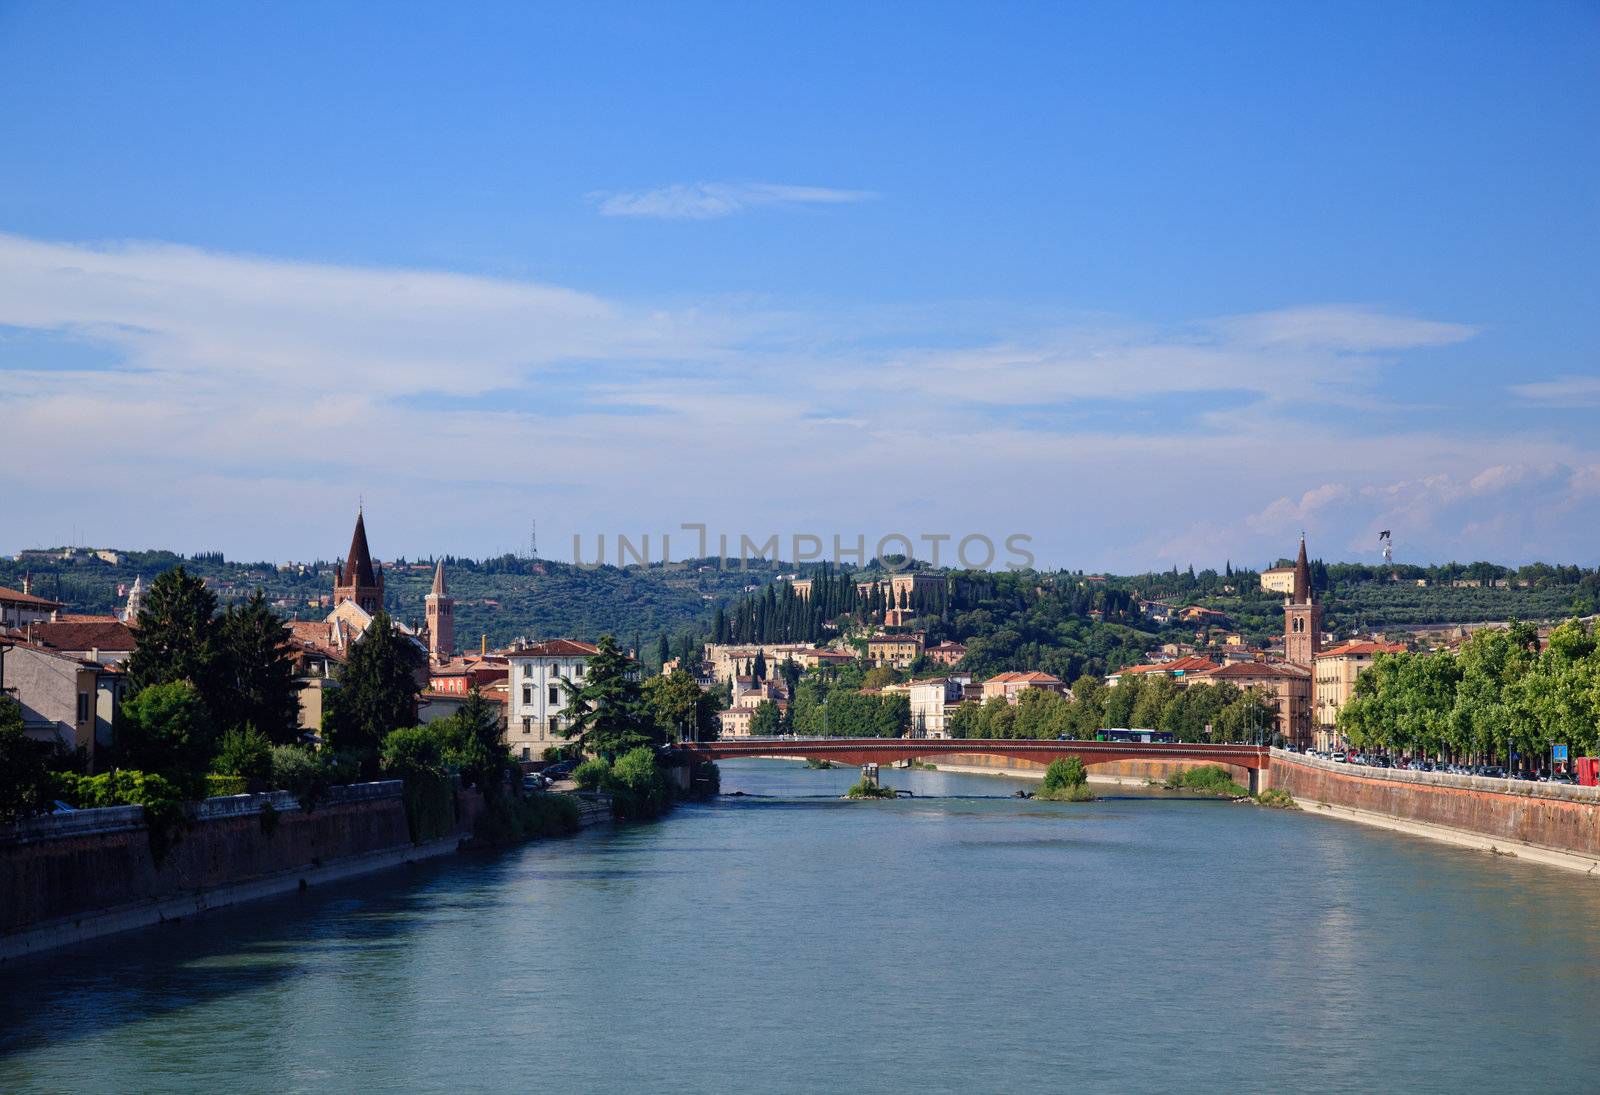 River front in Verona by steheap